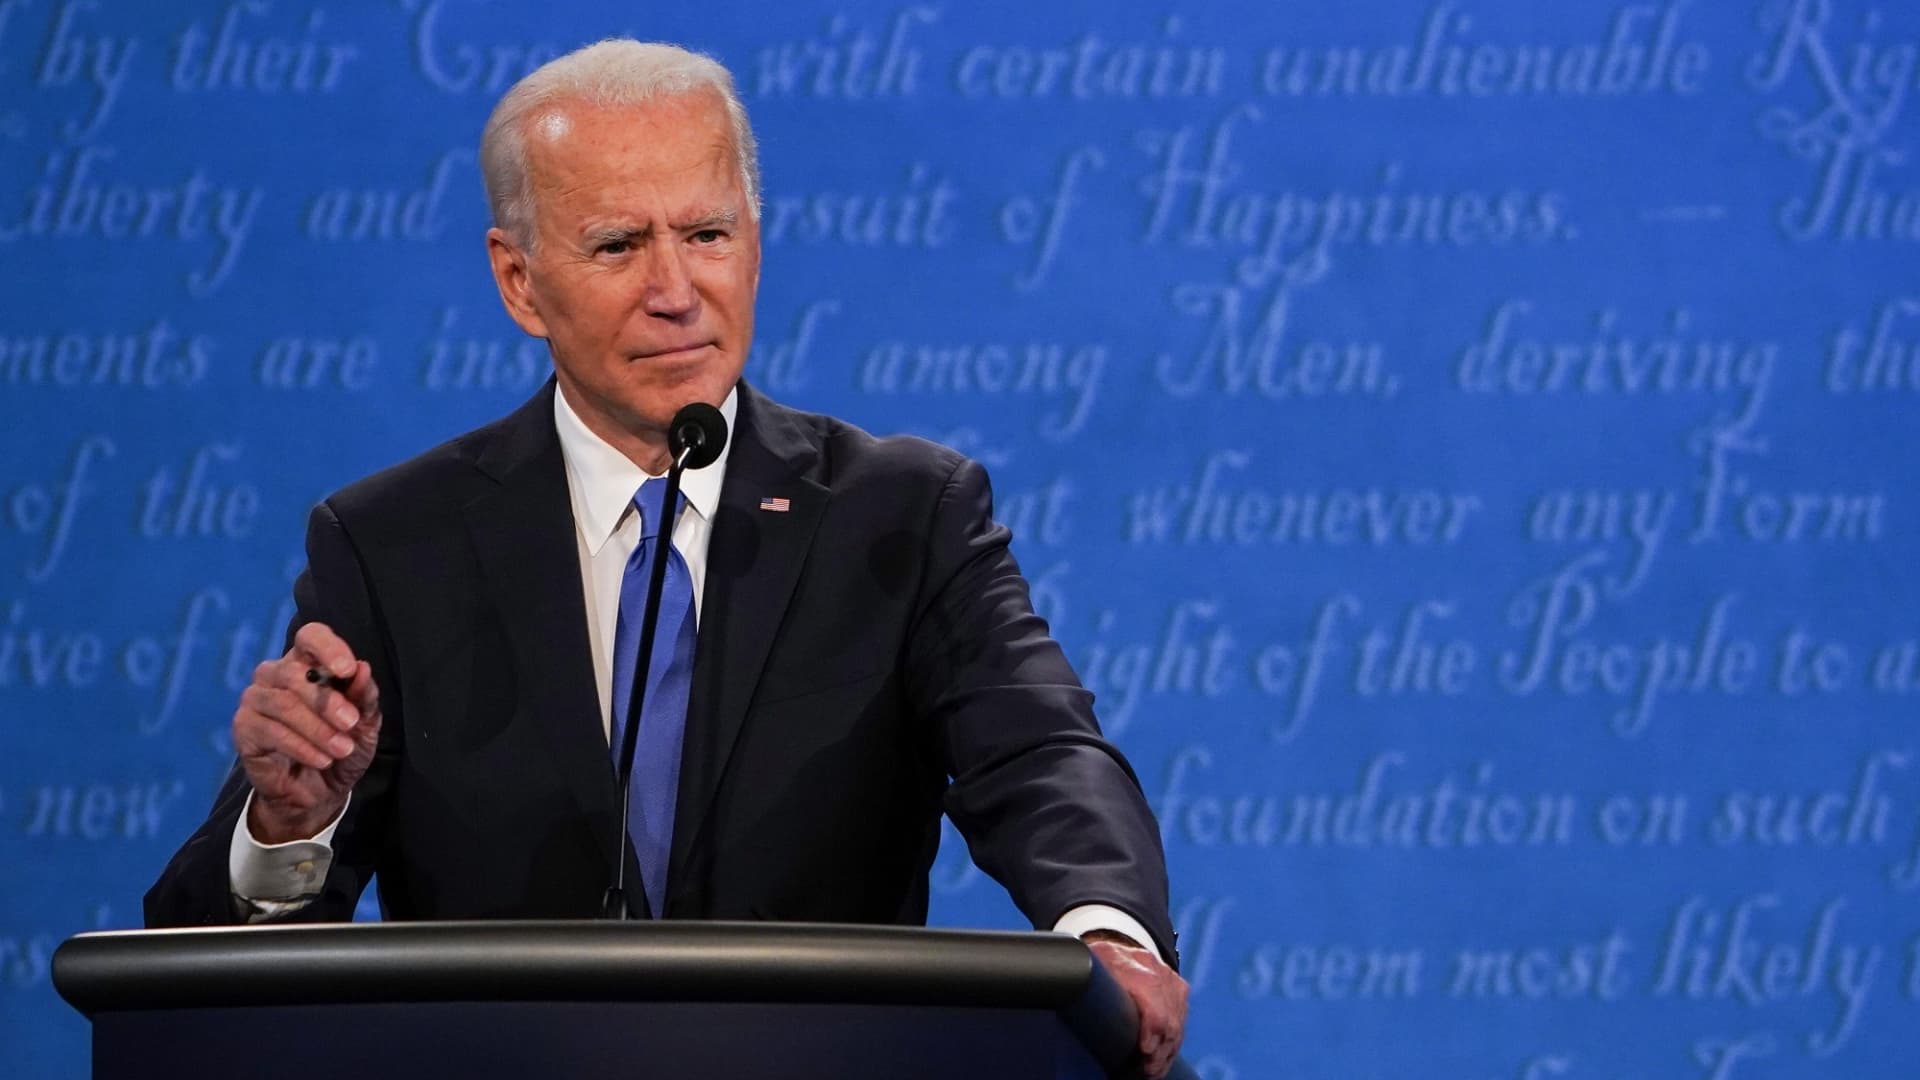 Democratic Presidential candidate and former US Vice President Joe Biden speaks during the final presidential debate at Belmont University in Nashville, Tennessee, on October 22, 2020.